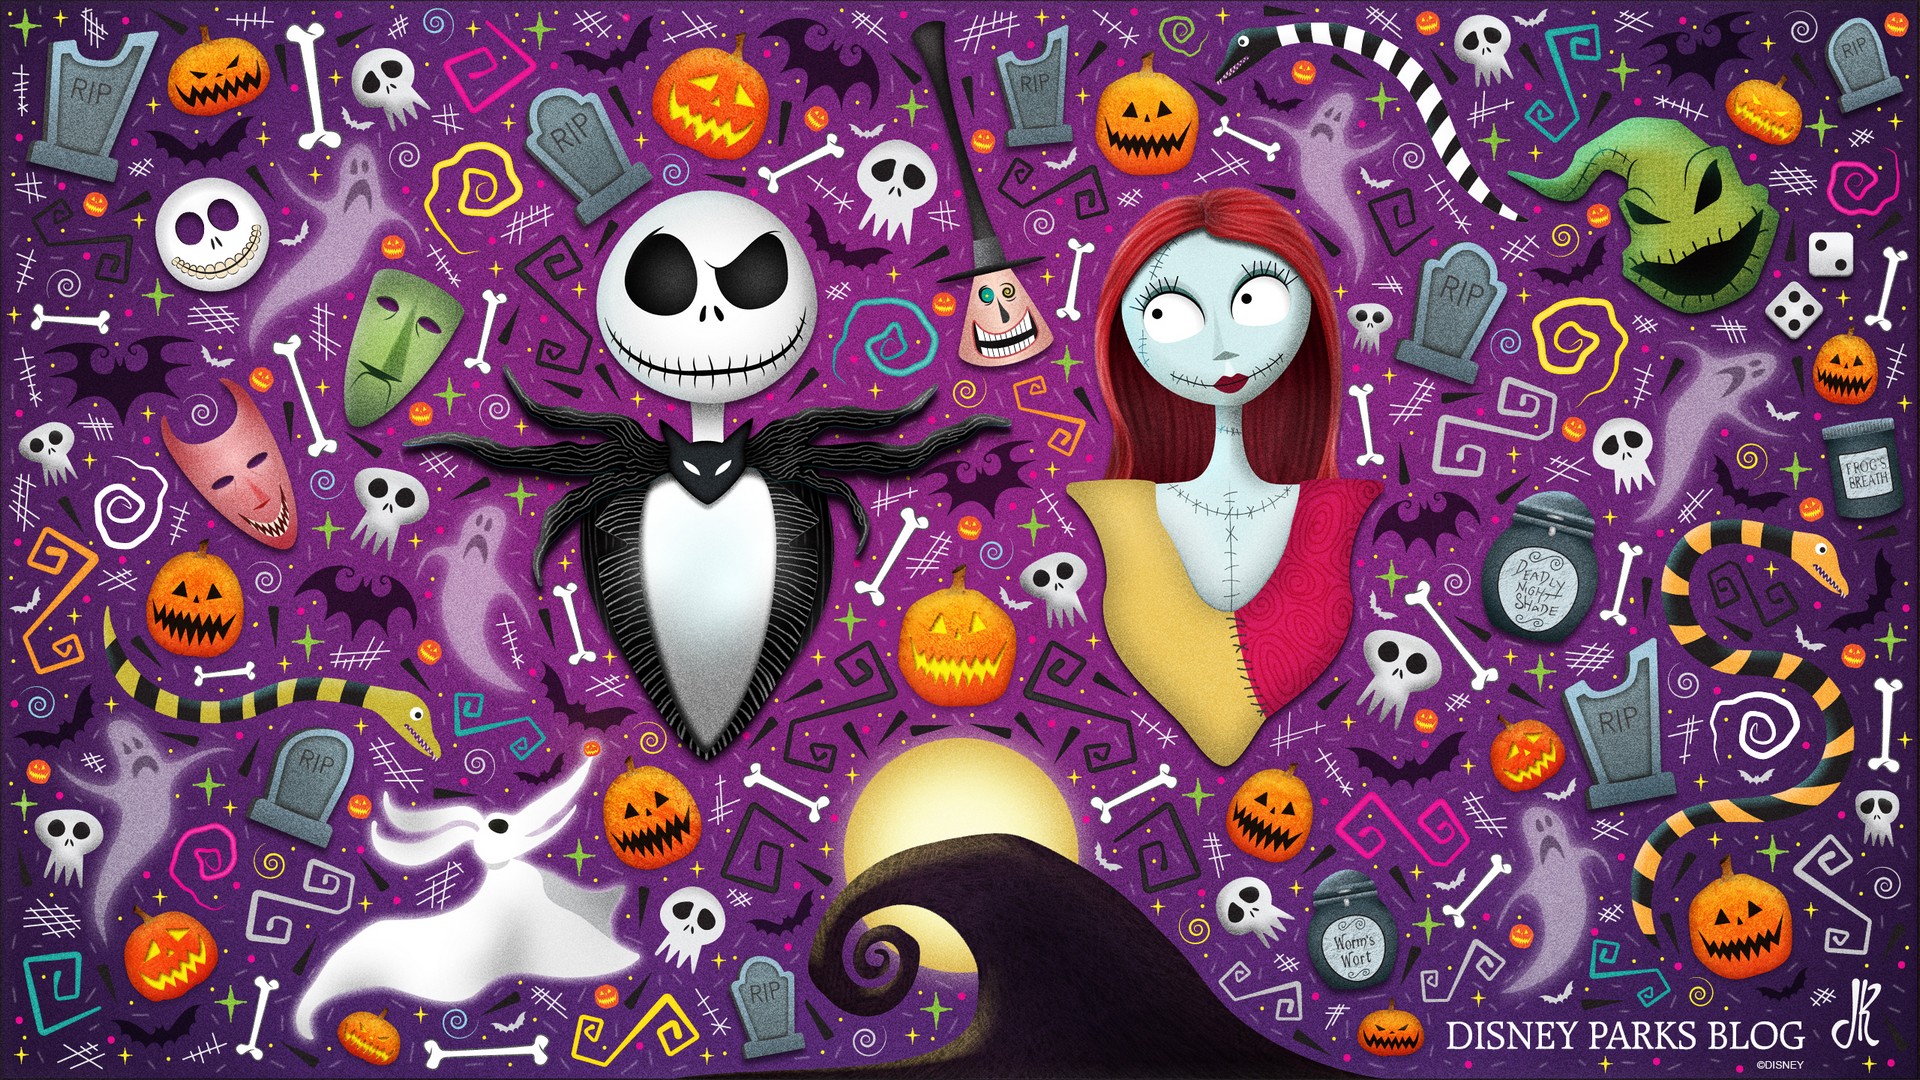 Wallpapers HD Nightmare Before Christmas With high-resolution 1920X1080 pixel. You can use this poster wallpaper for your Desktop Computers, Mac Screensavers, Windows Backgrounds, iPhone Wallpapers, Tablet or Android Lock screen and another Mobile device